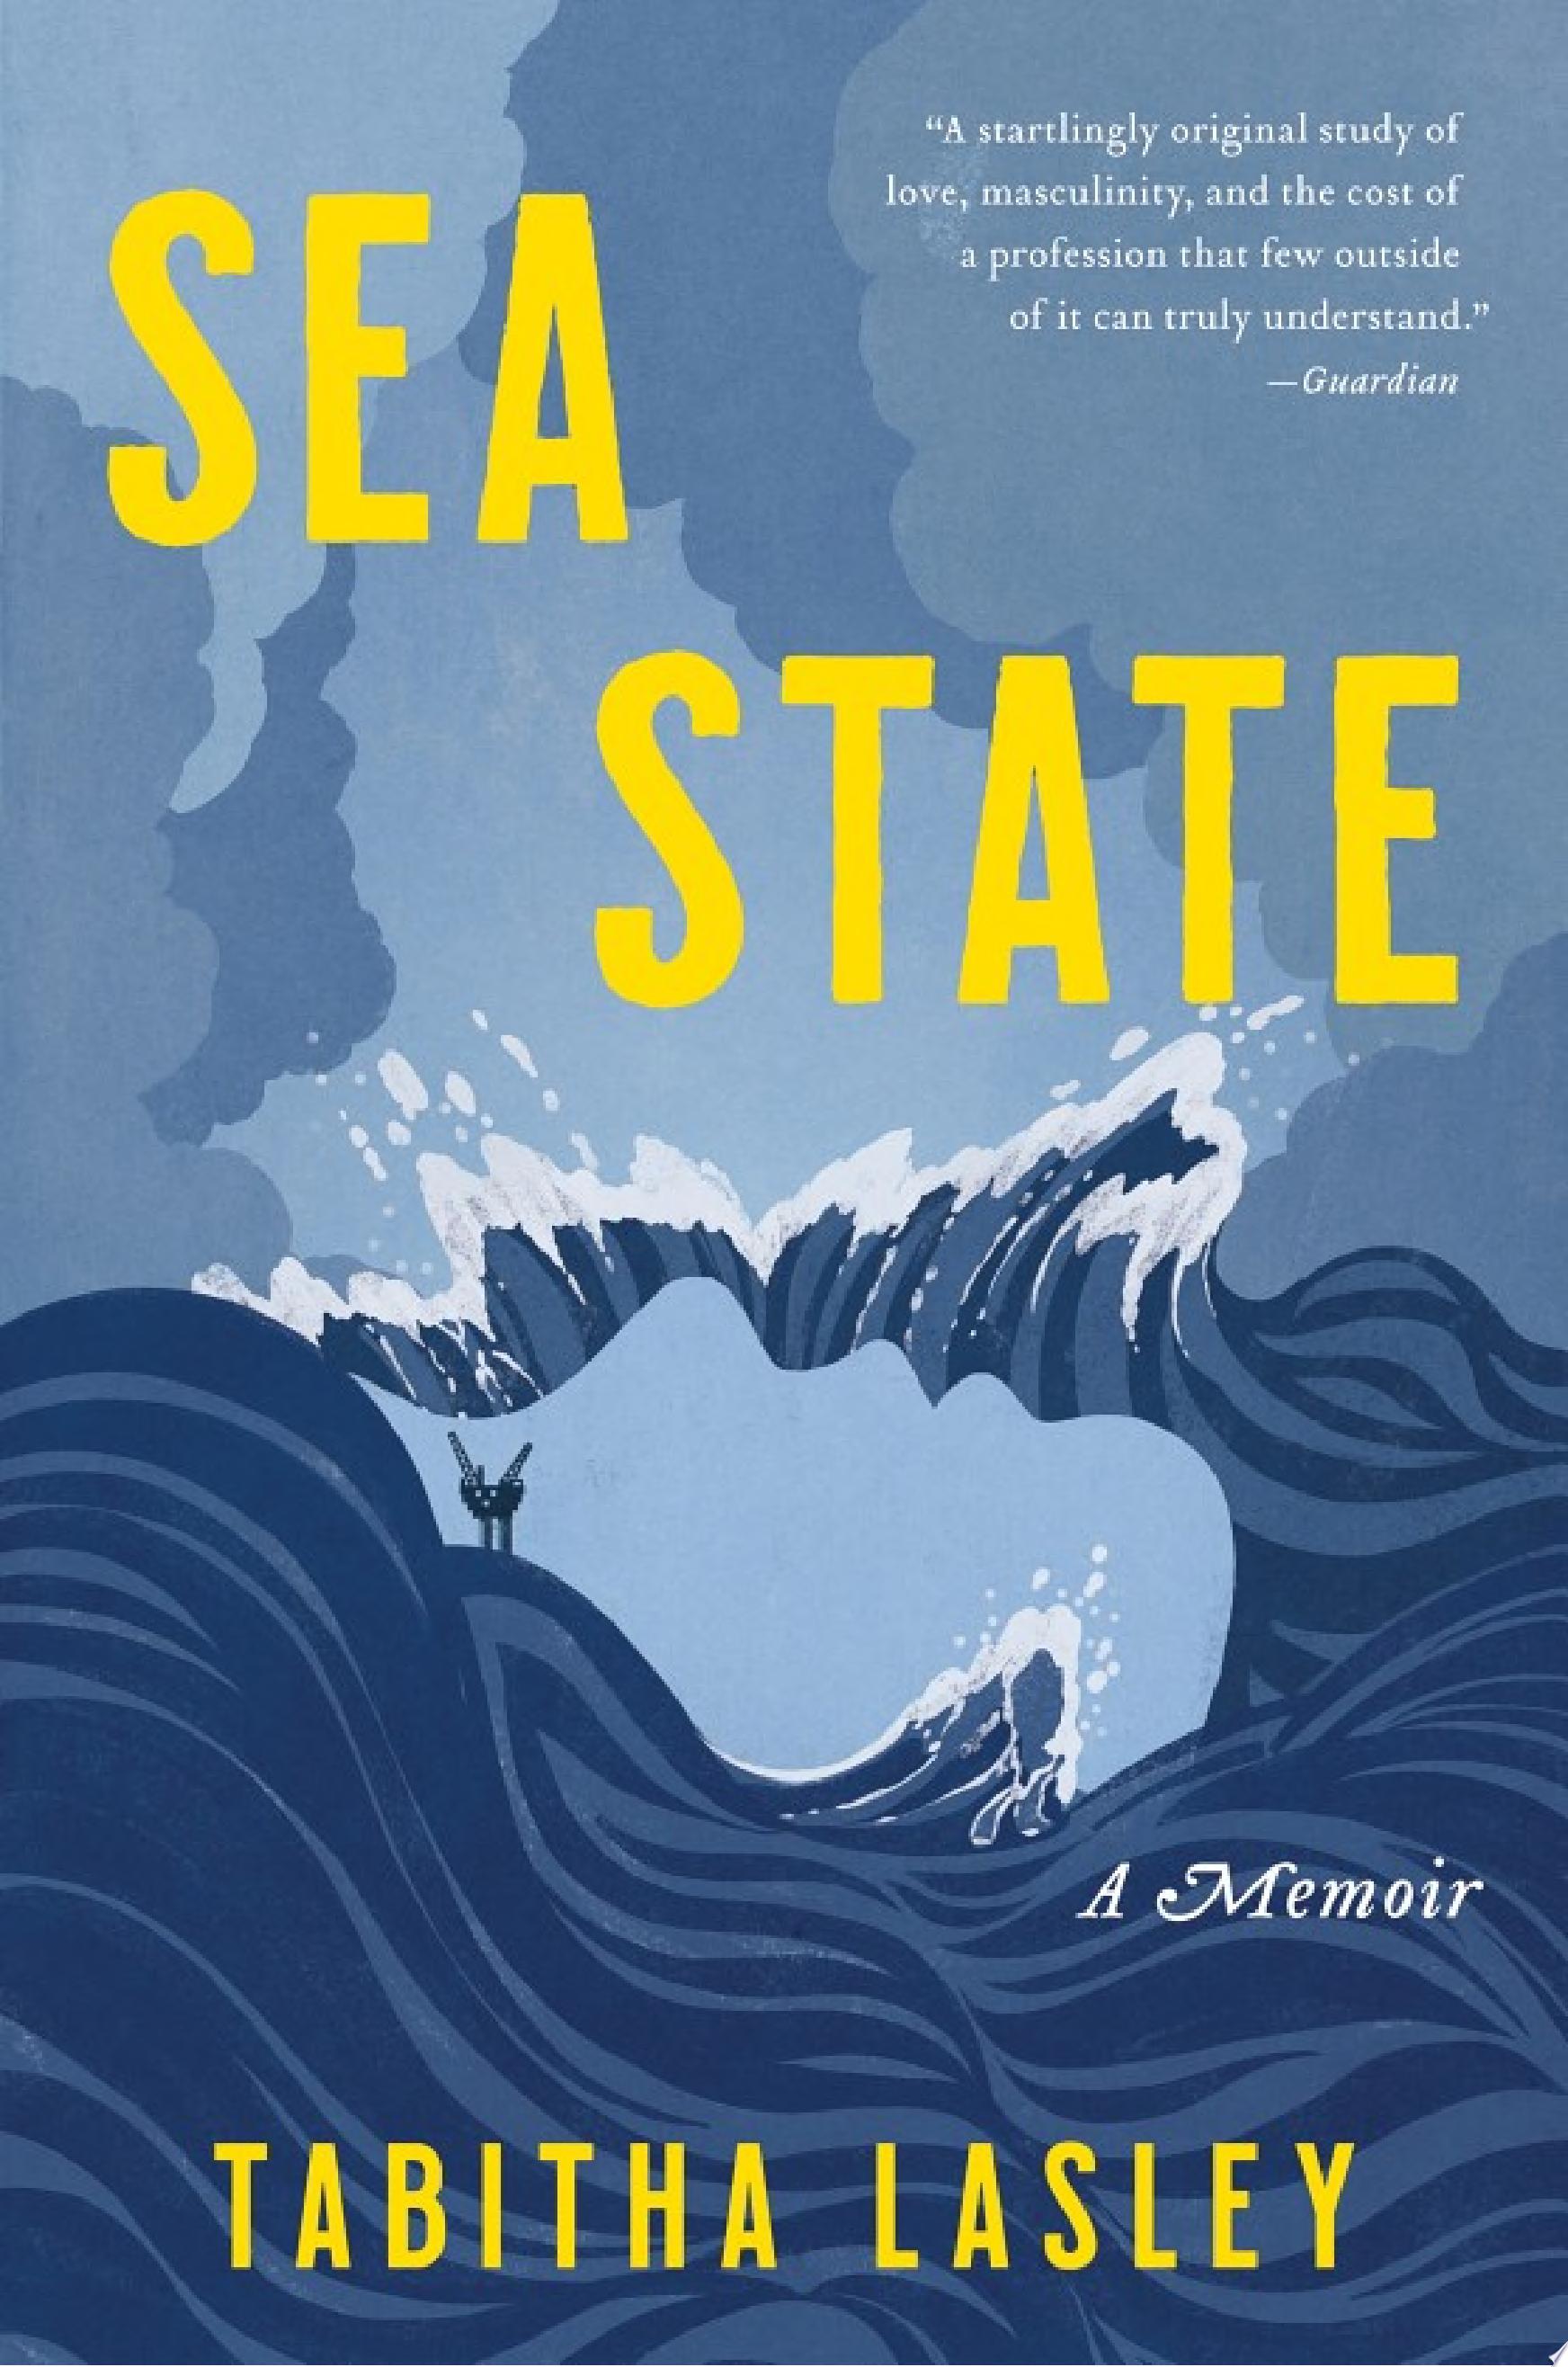 Image for "Sea State"